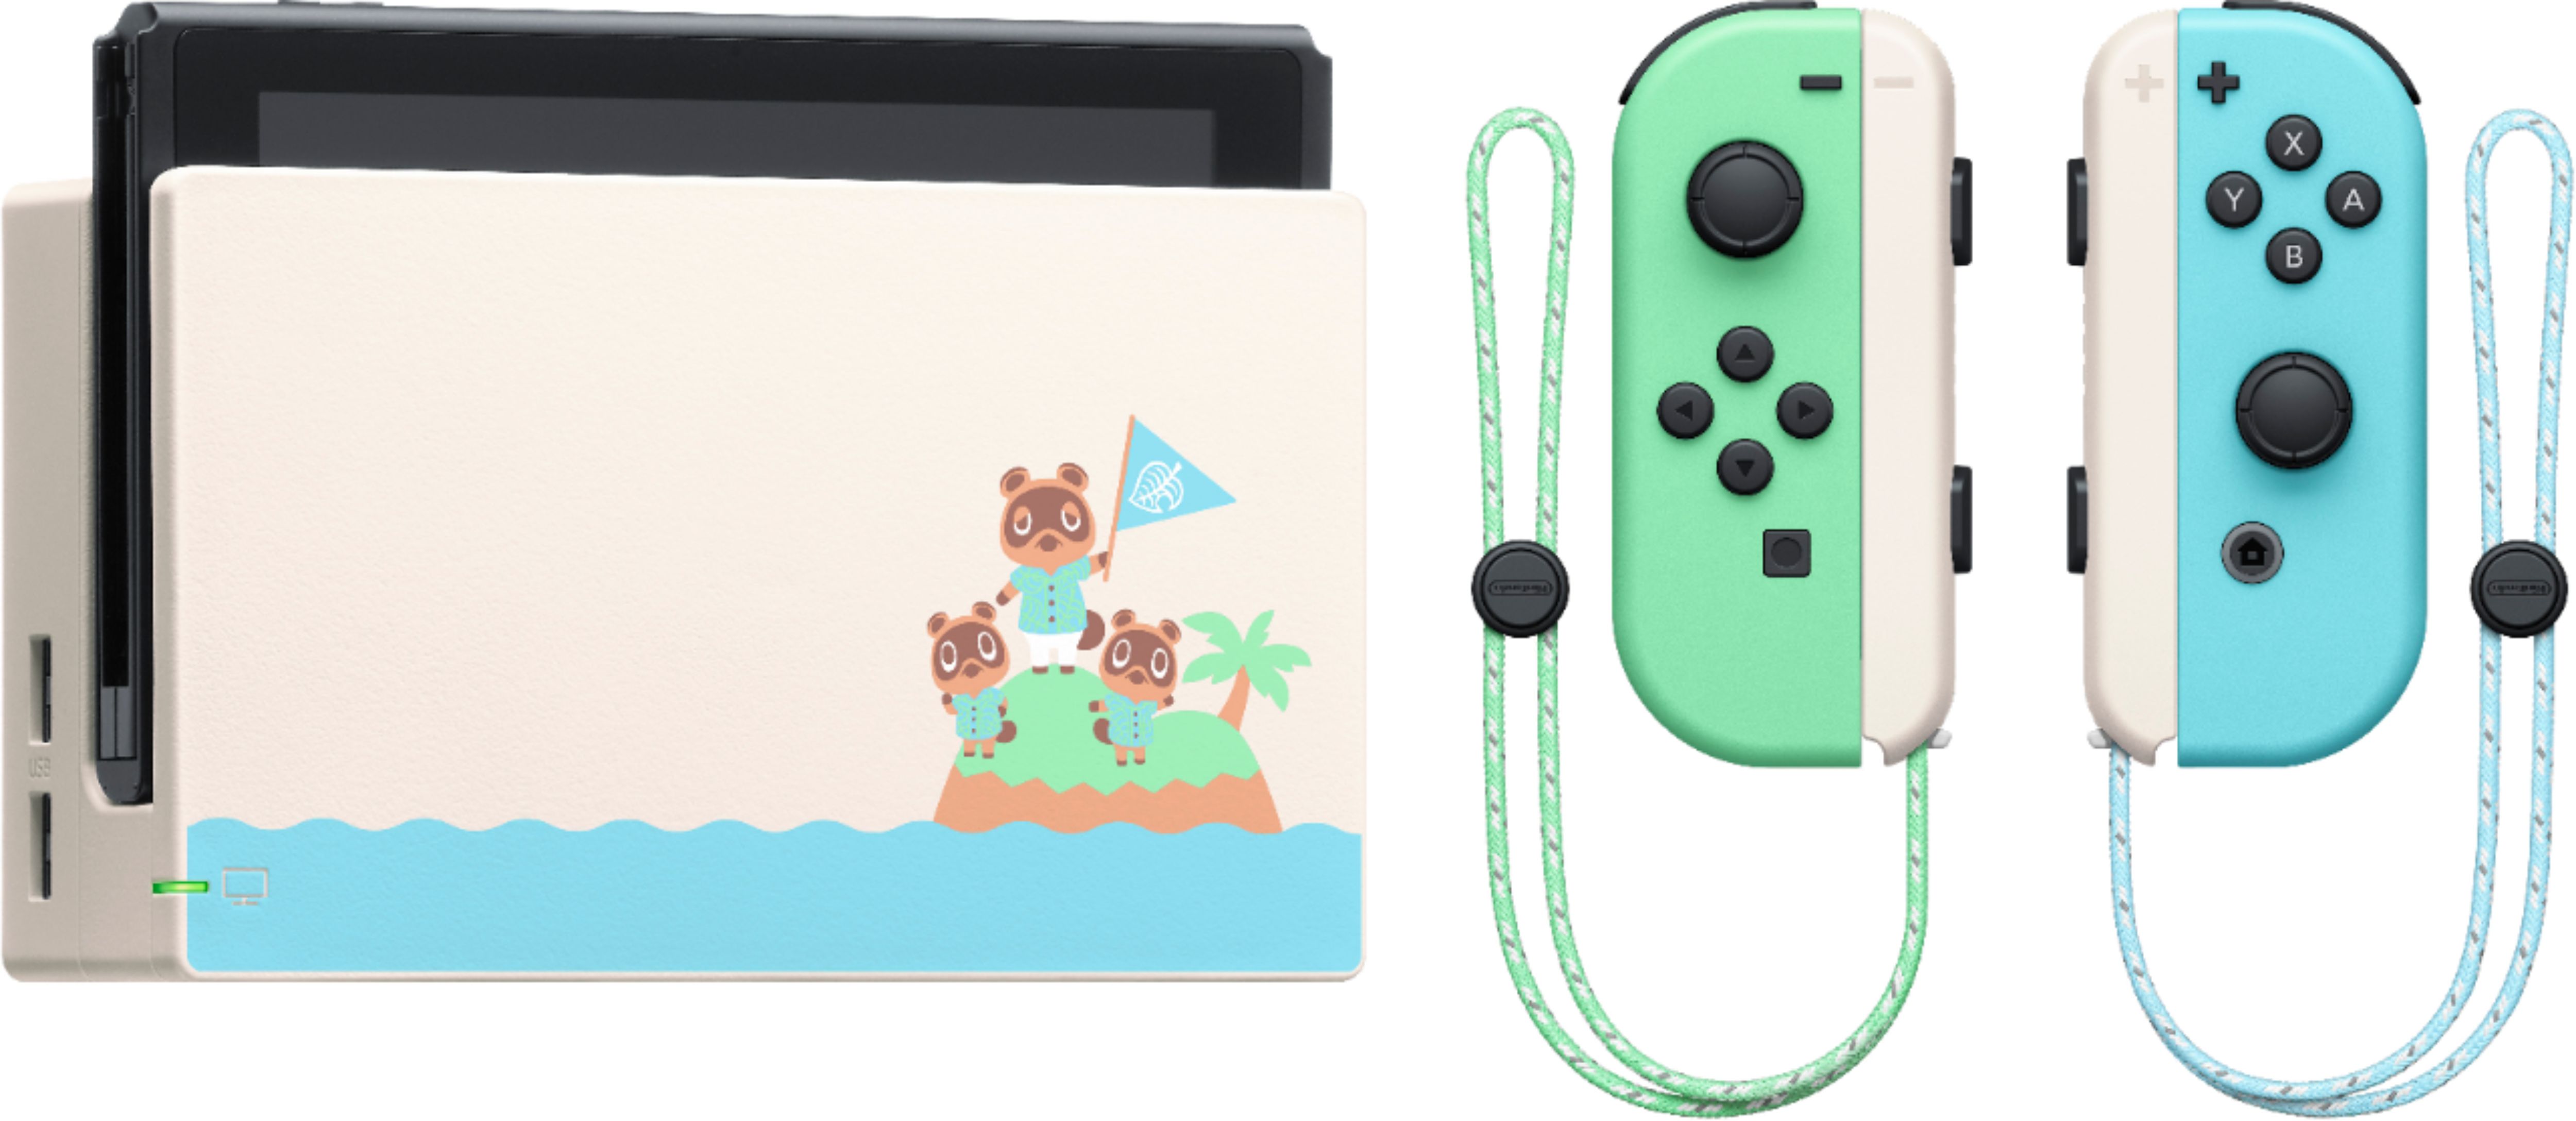 nintendo switch 1.1 console with animal crossing